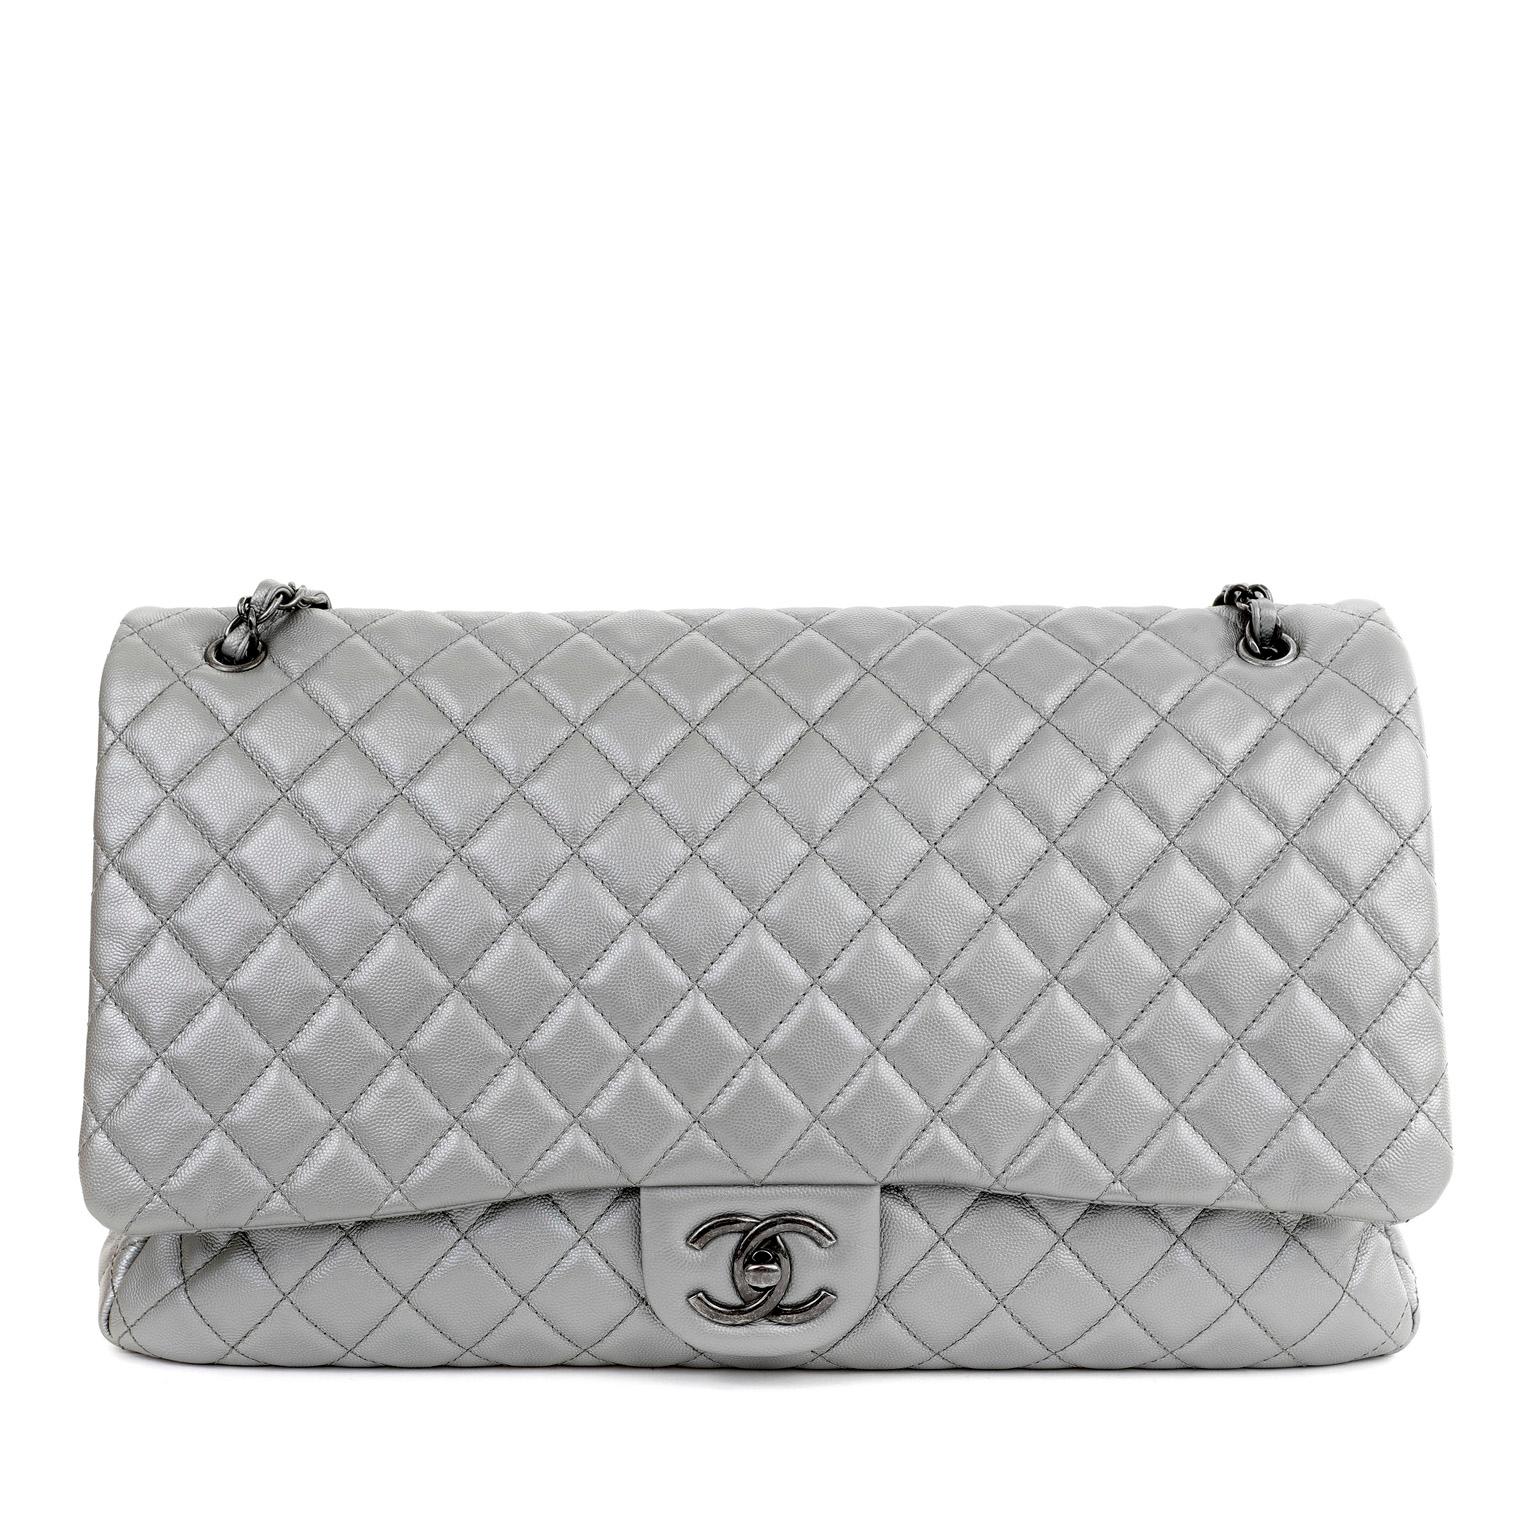 This authentic Chanel Silver Caviar Classic Travel XXL Flap Bag is in pristine condition.  Most certainly the chicest way to travel, this extra-large Classic Flap will get you there in style.

Silver caviar leather is quilted in signature Chanel